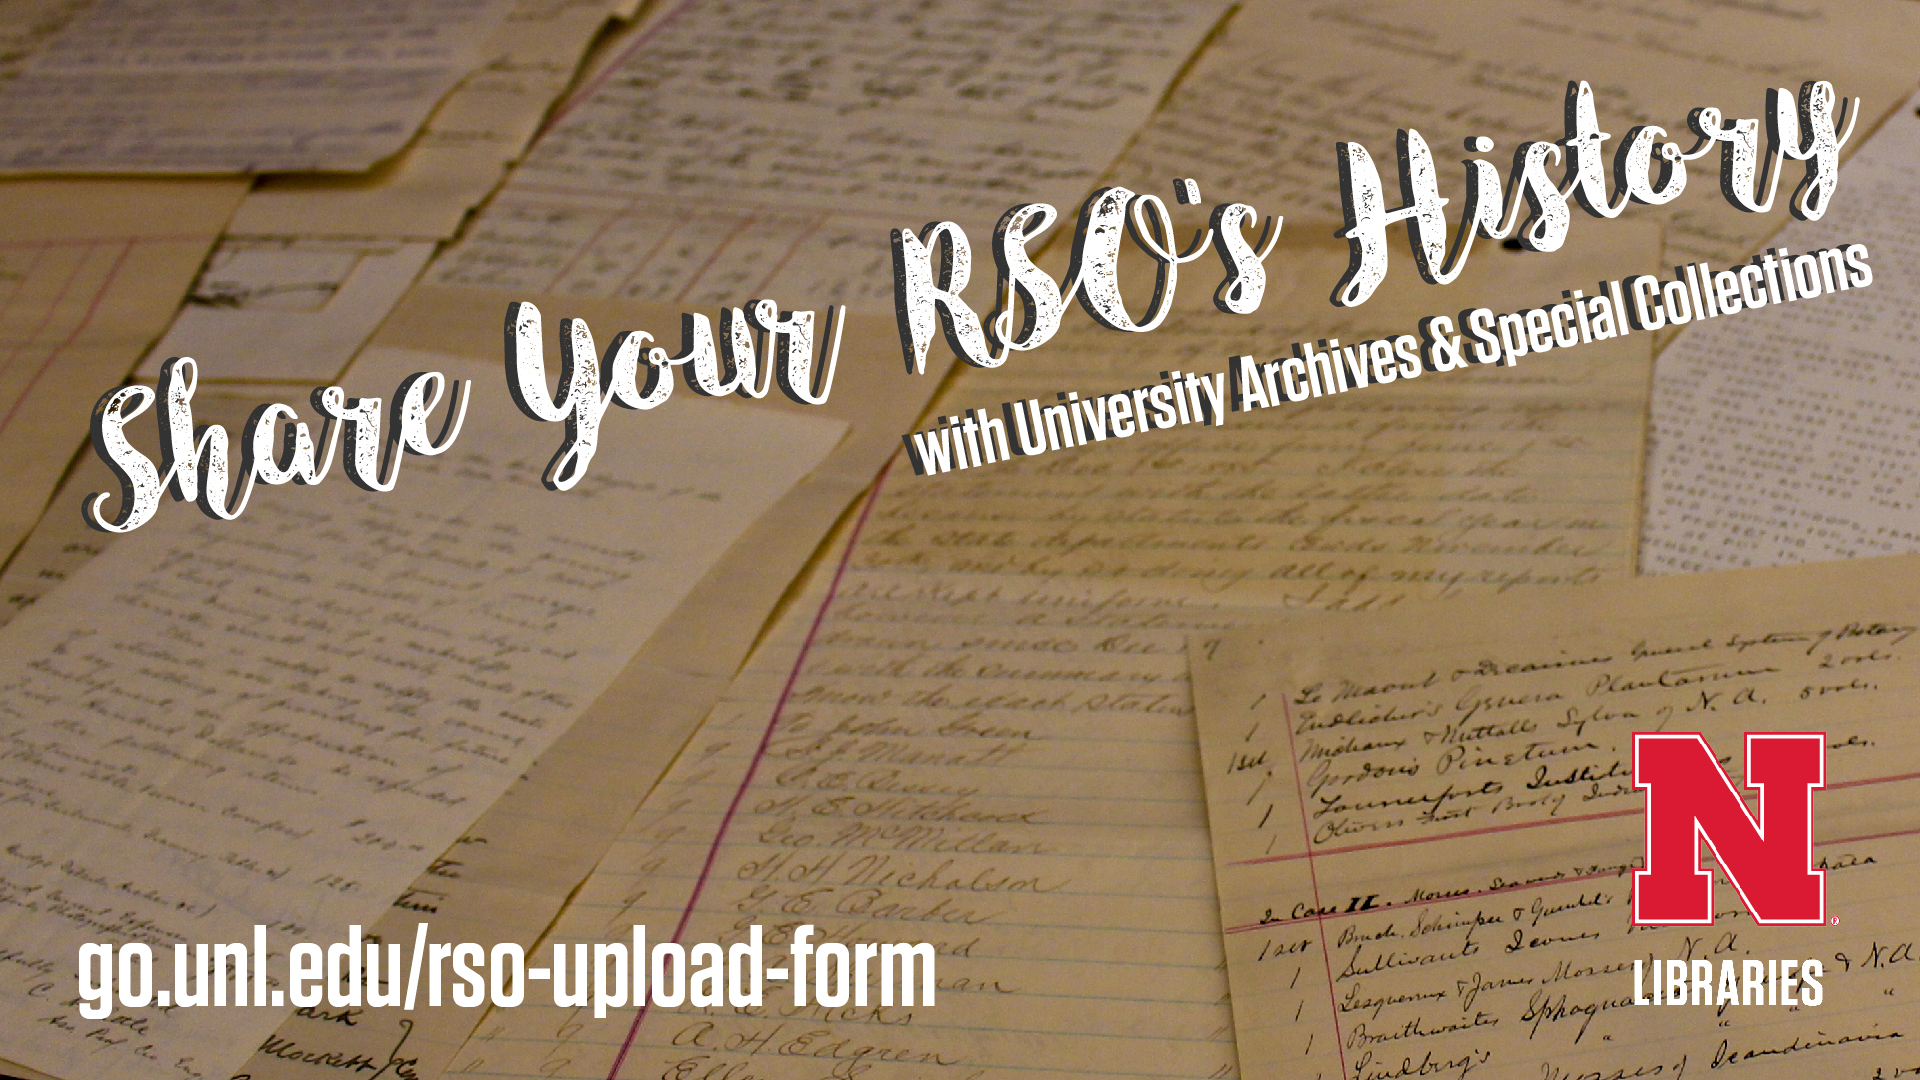 Start the submission process: https://libraries.unl.edu/rso-upload-form